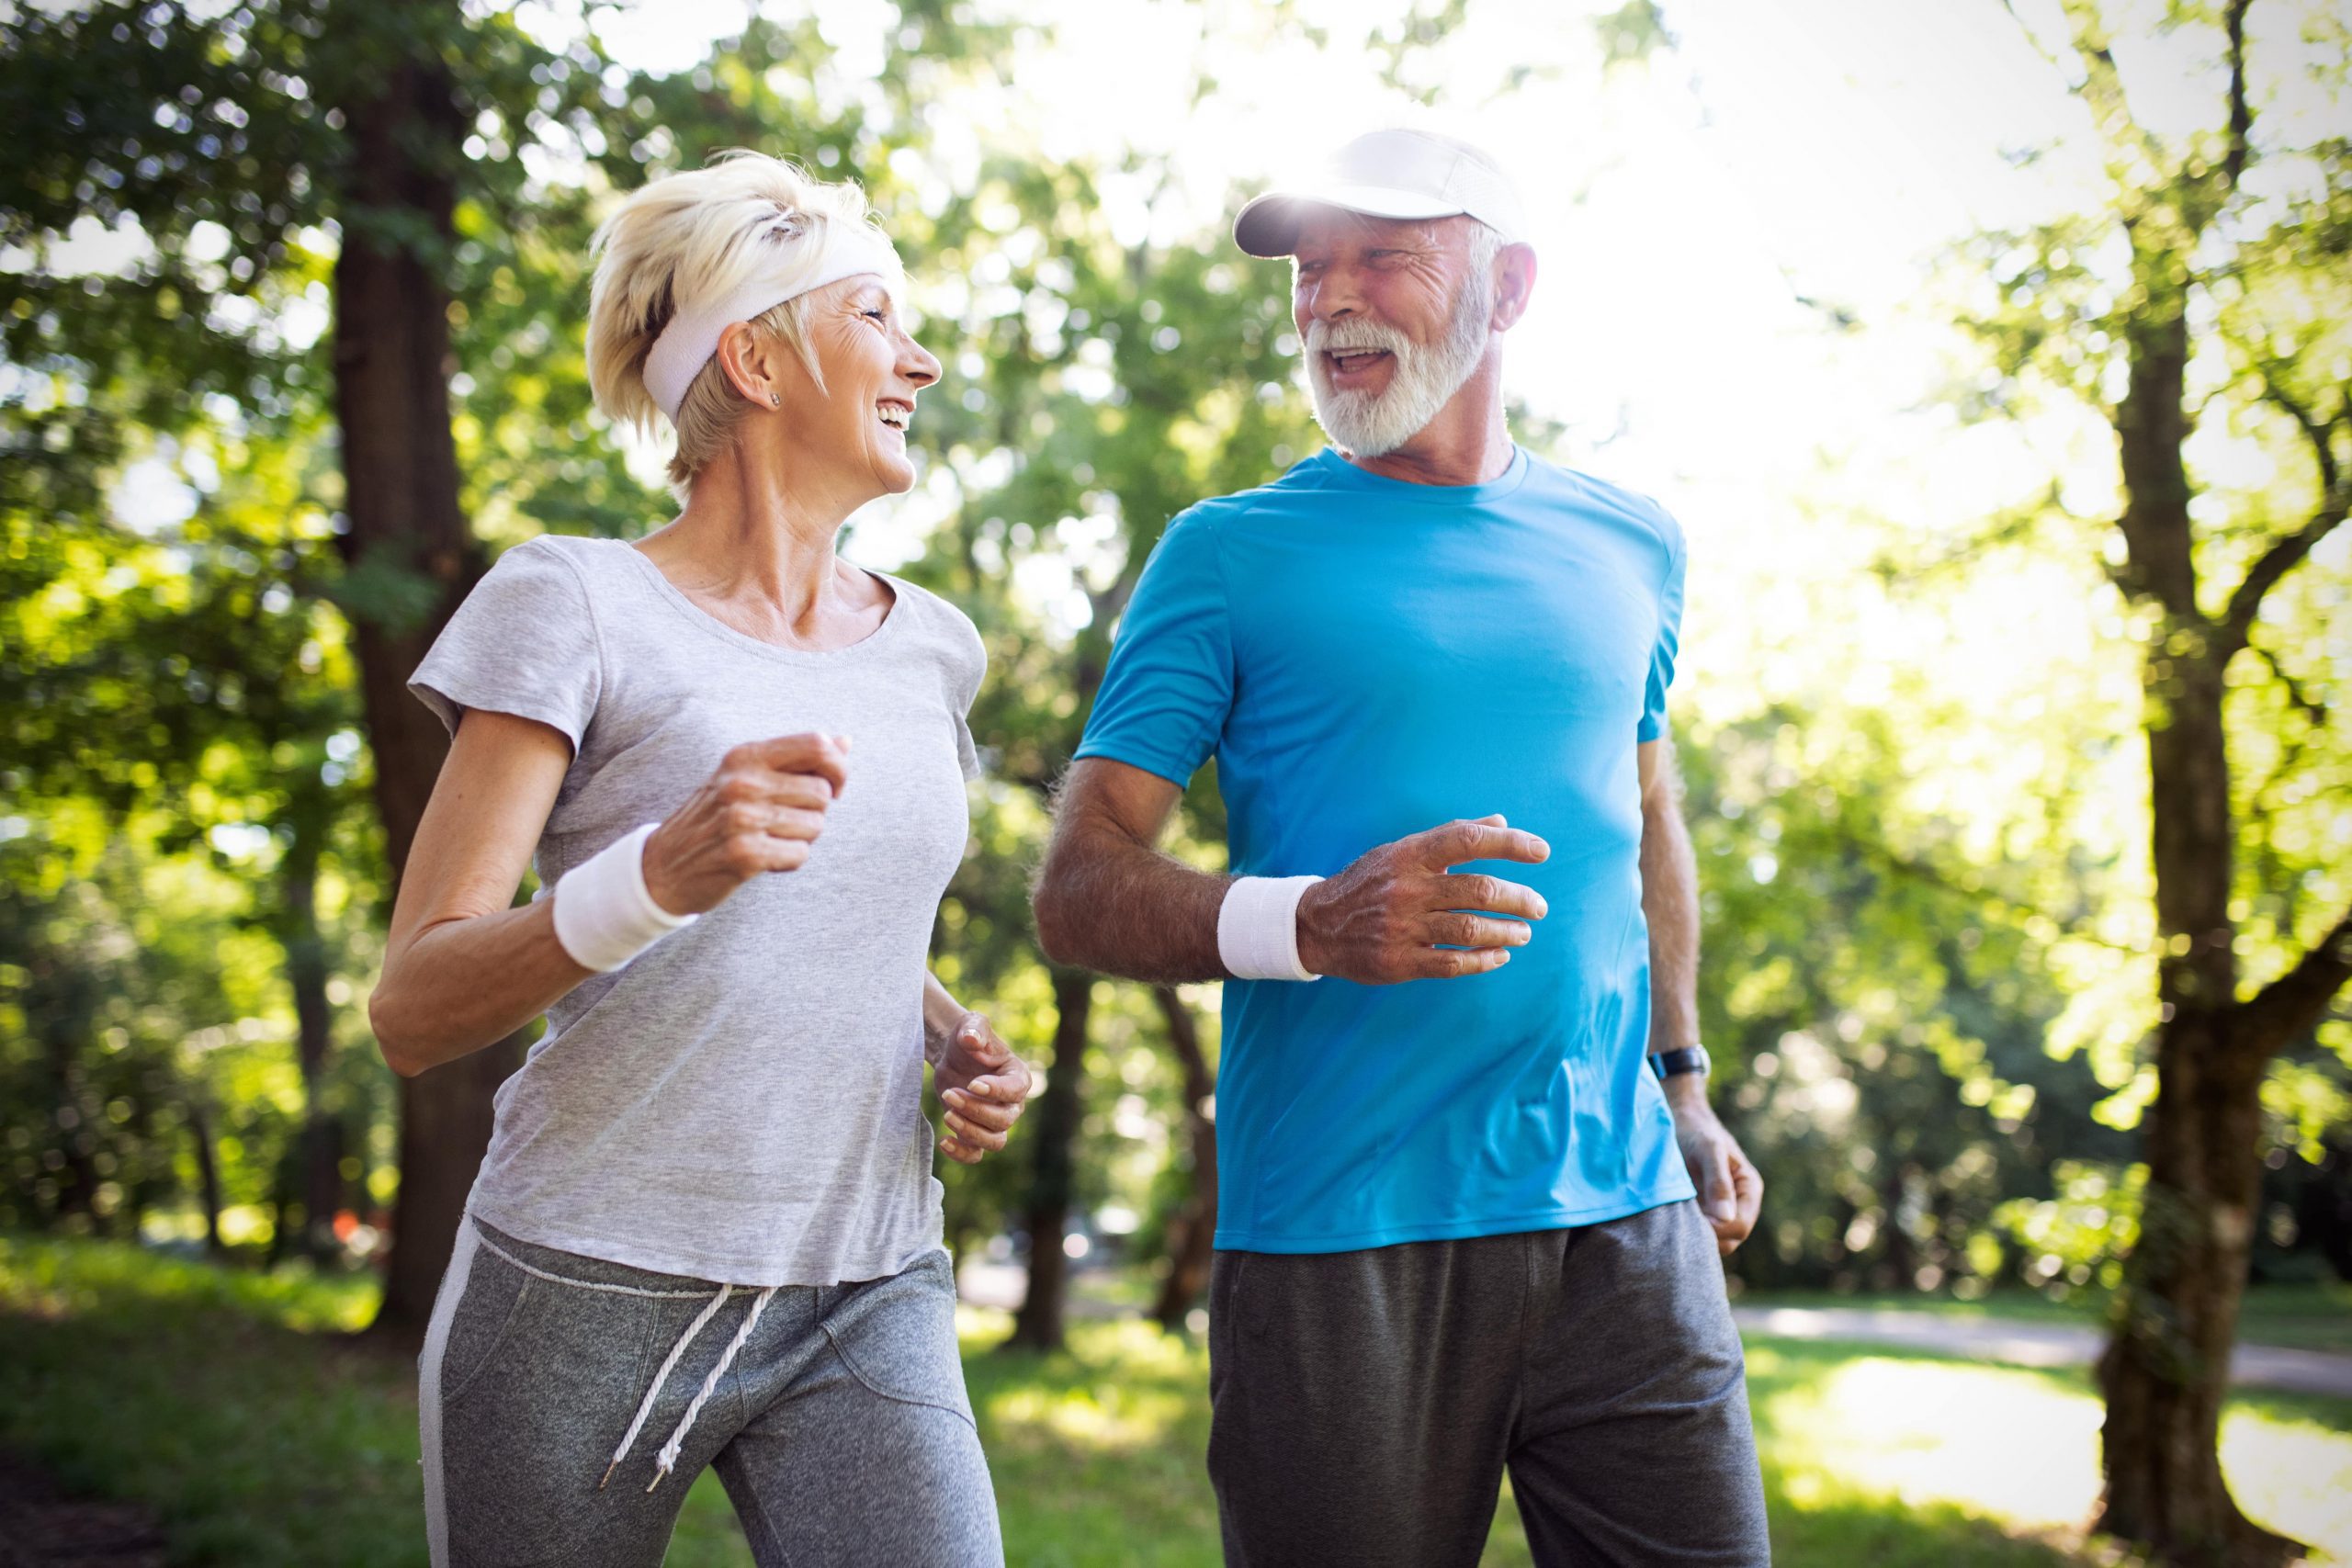 7 Healthy Hobbies for Over 50s